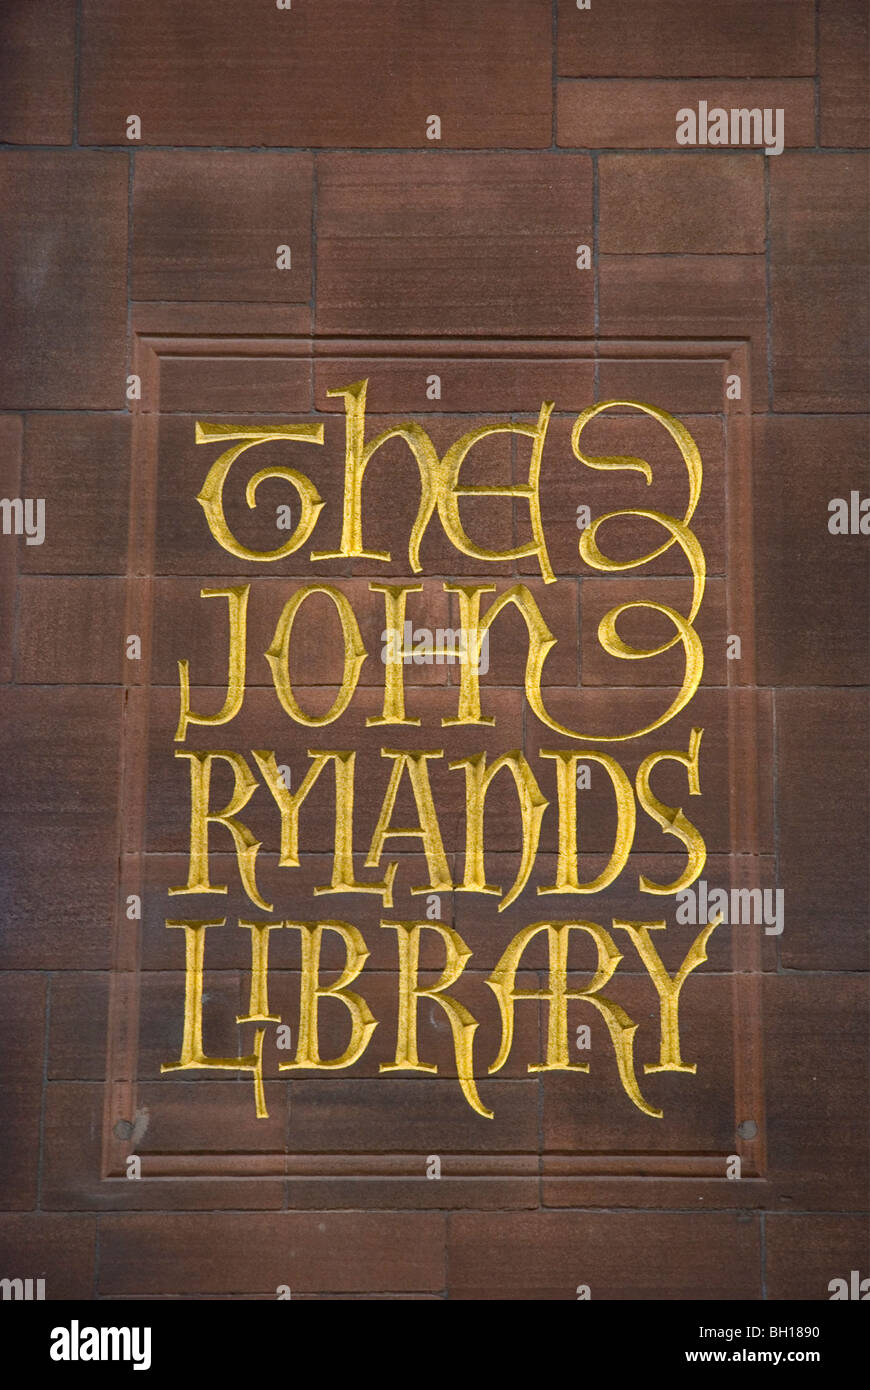 John Rylands Library sign Spinningfields district central Manchester England UK Europe Stock Photo